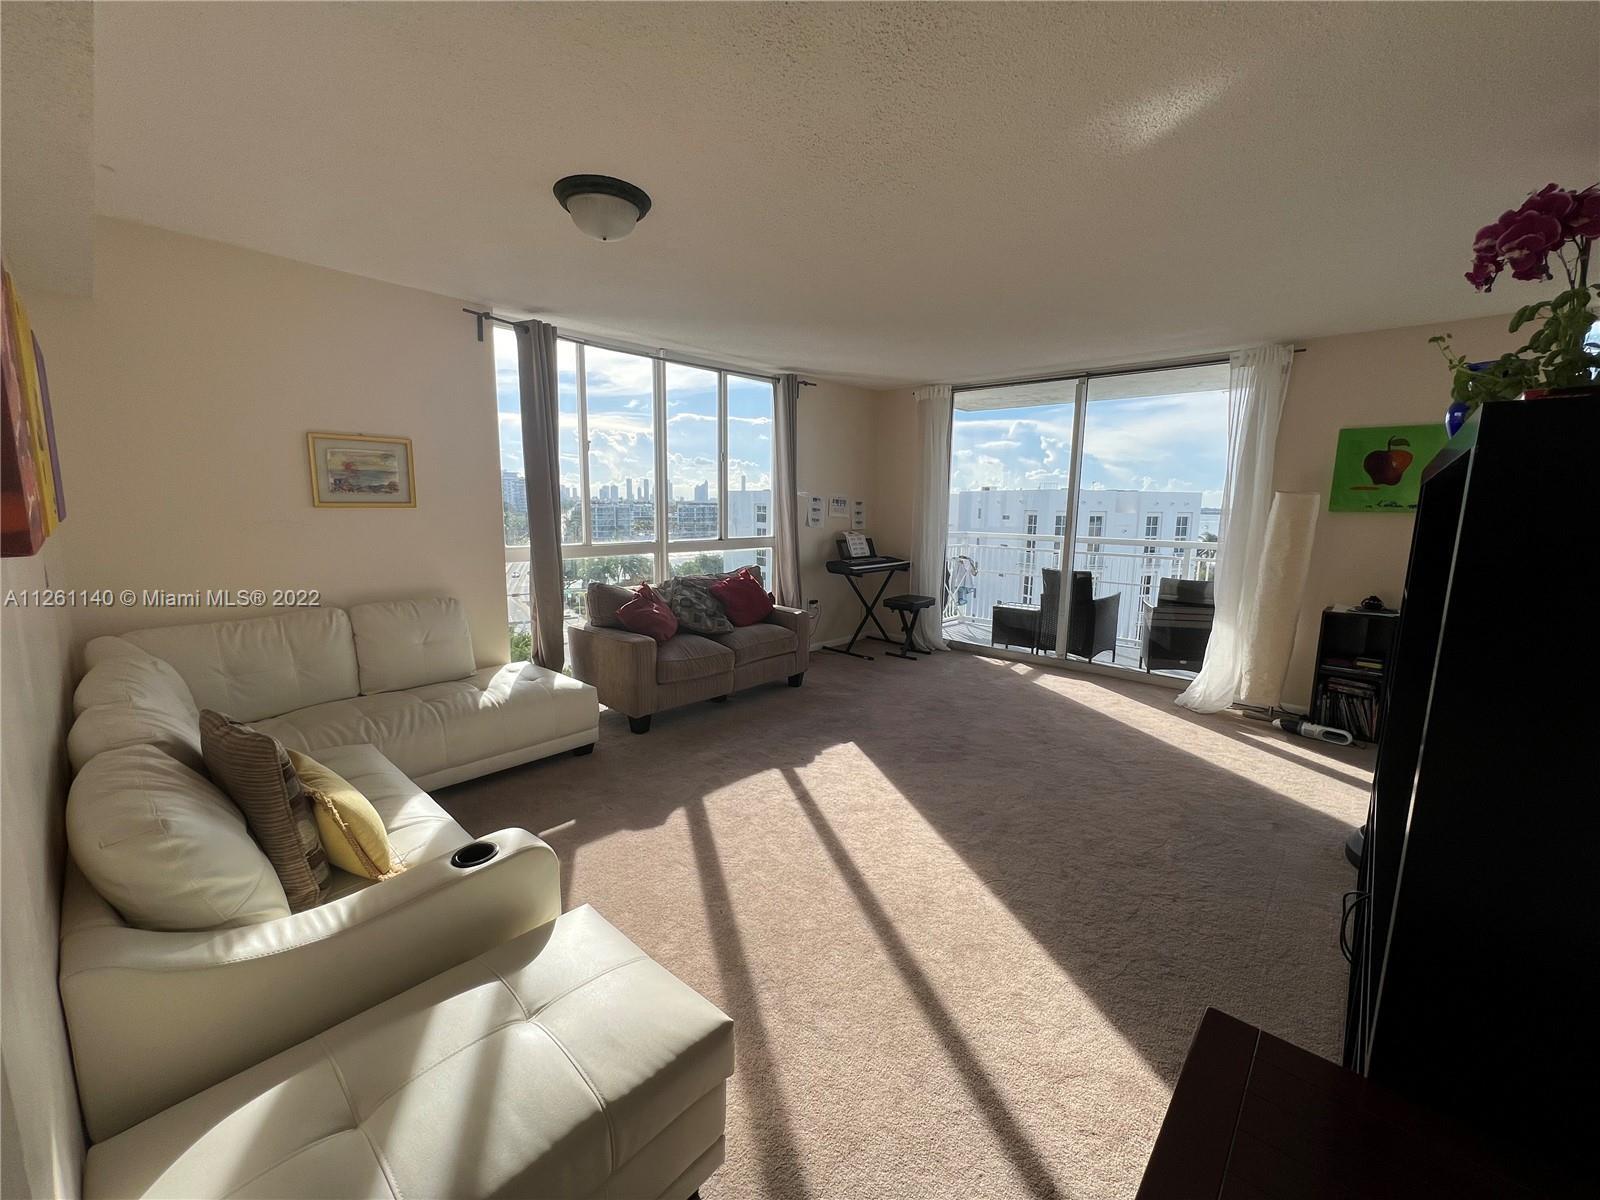 Very bright corner unit, facing west and north, 2 large bedrooms and corner living/dining area with 